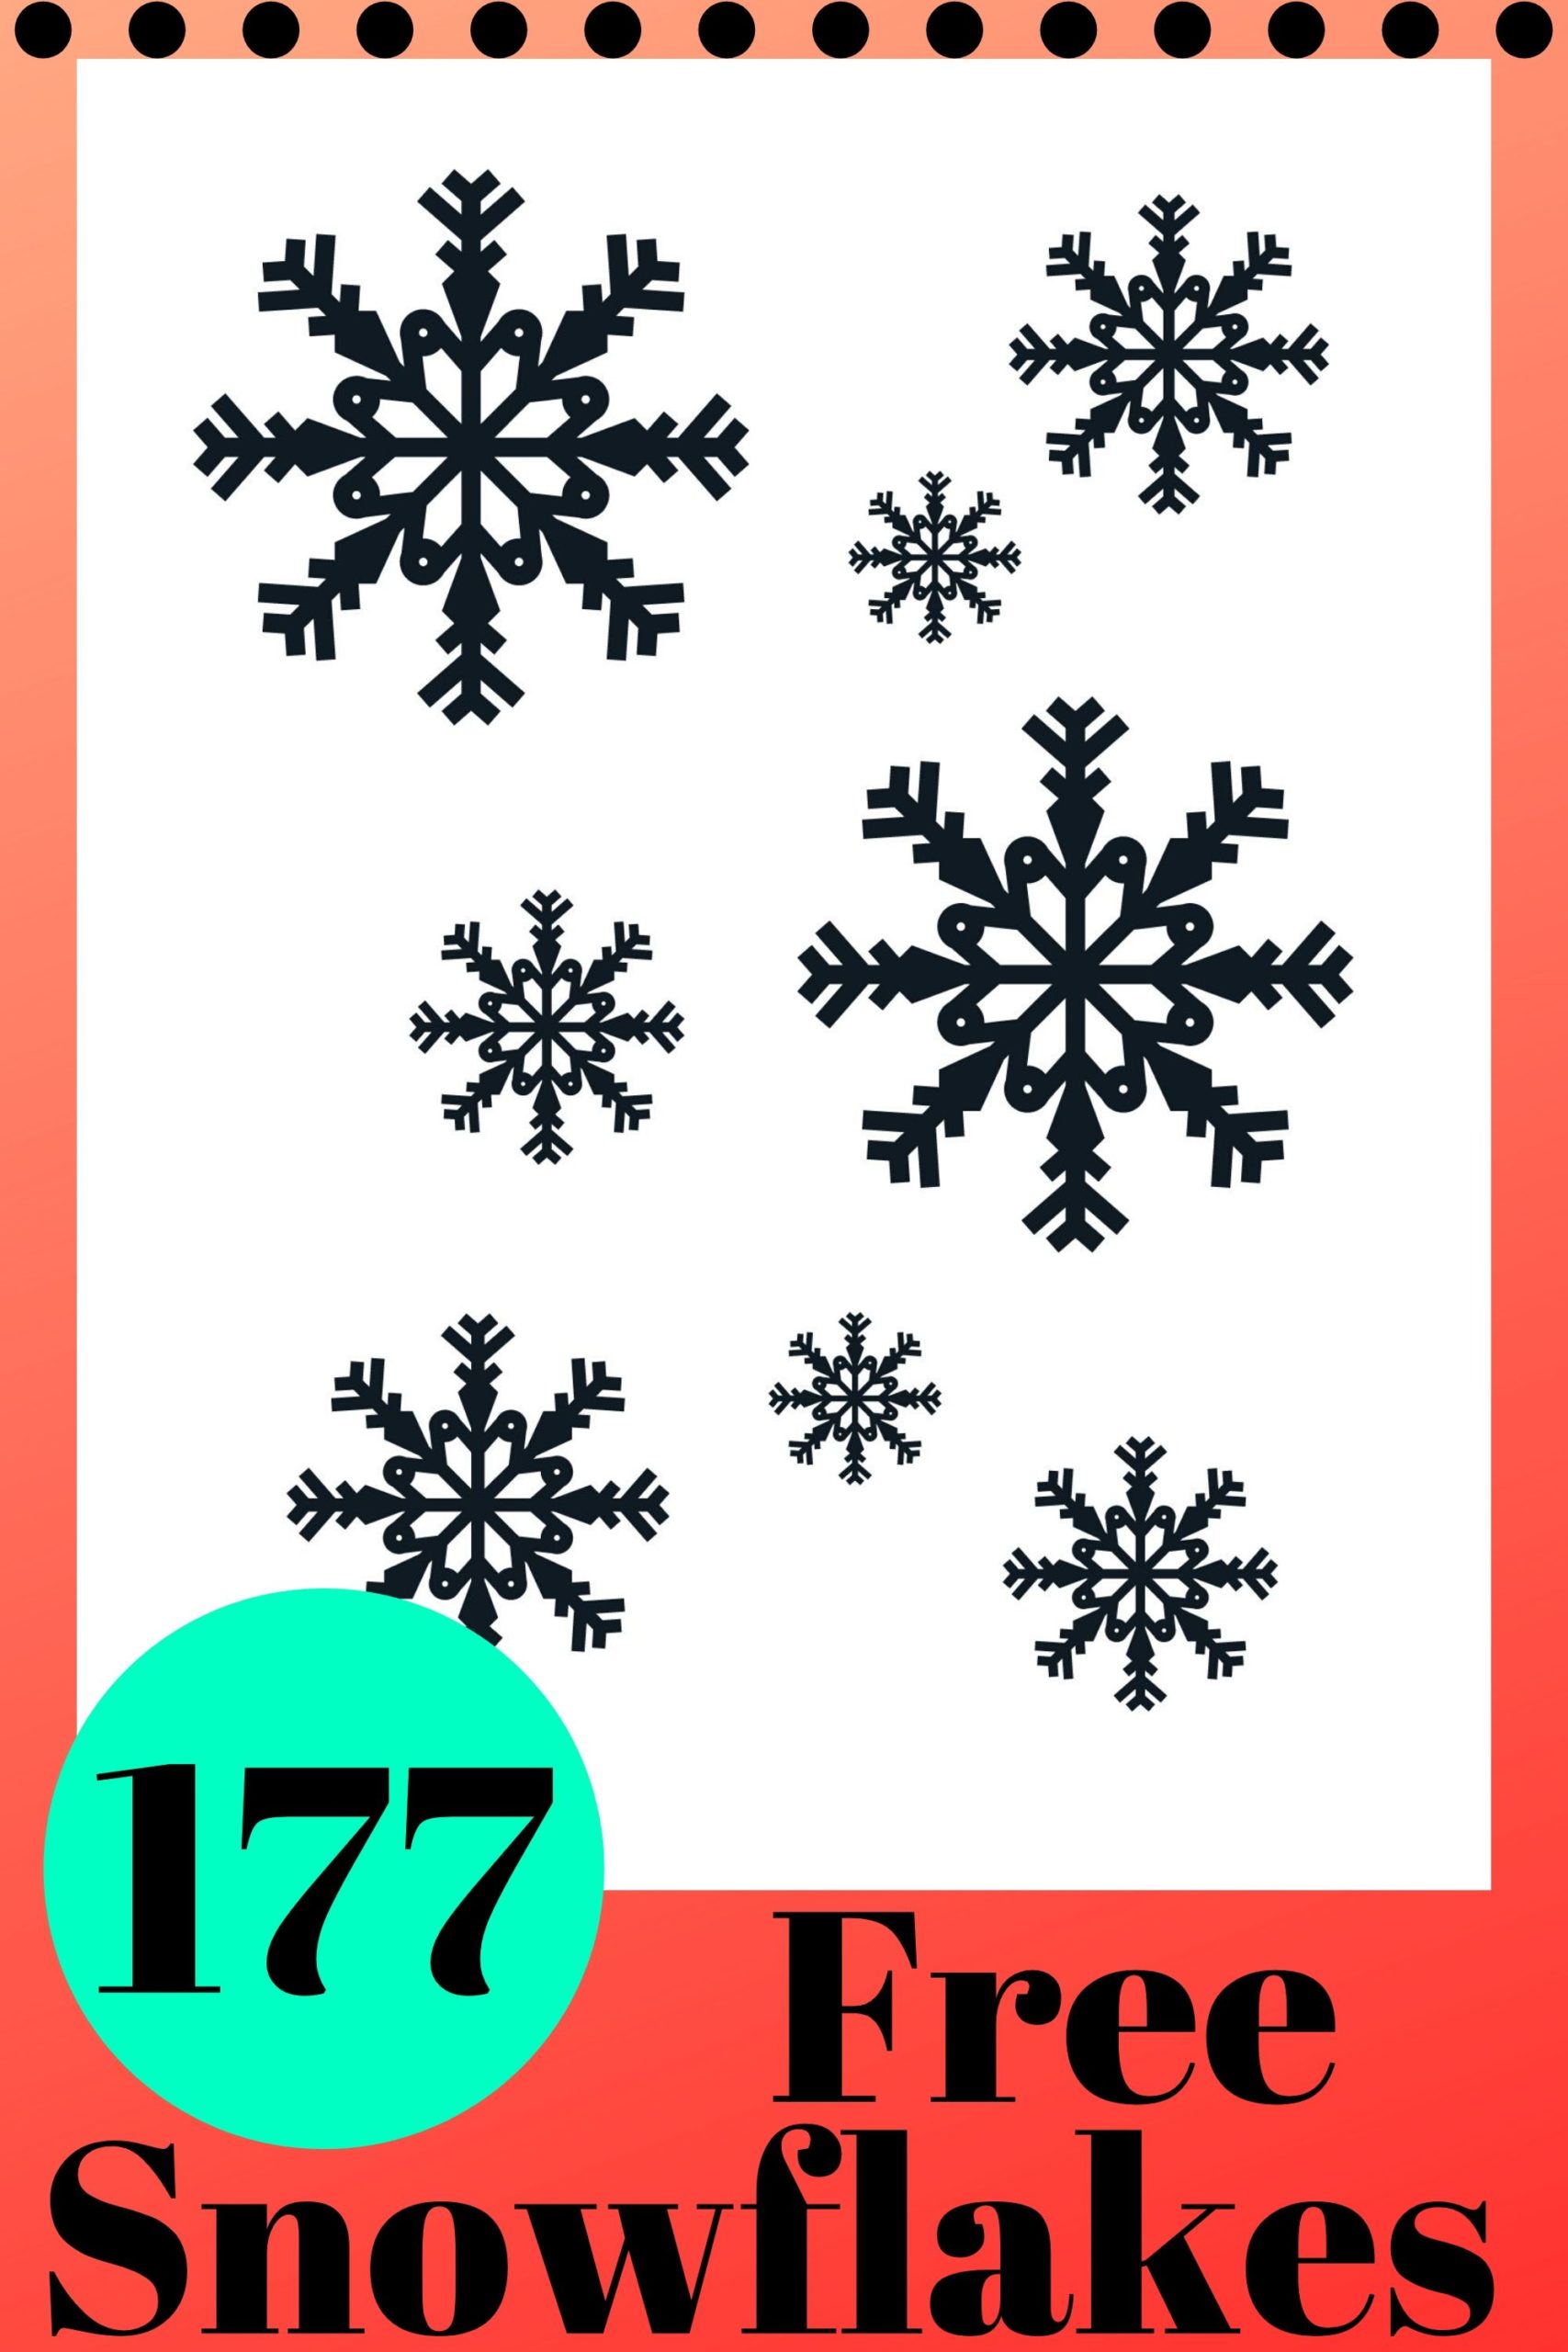 A 8.5" x 11" white page with 8 snowflake designs on it in sizes small, medium, and large in black ink.